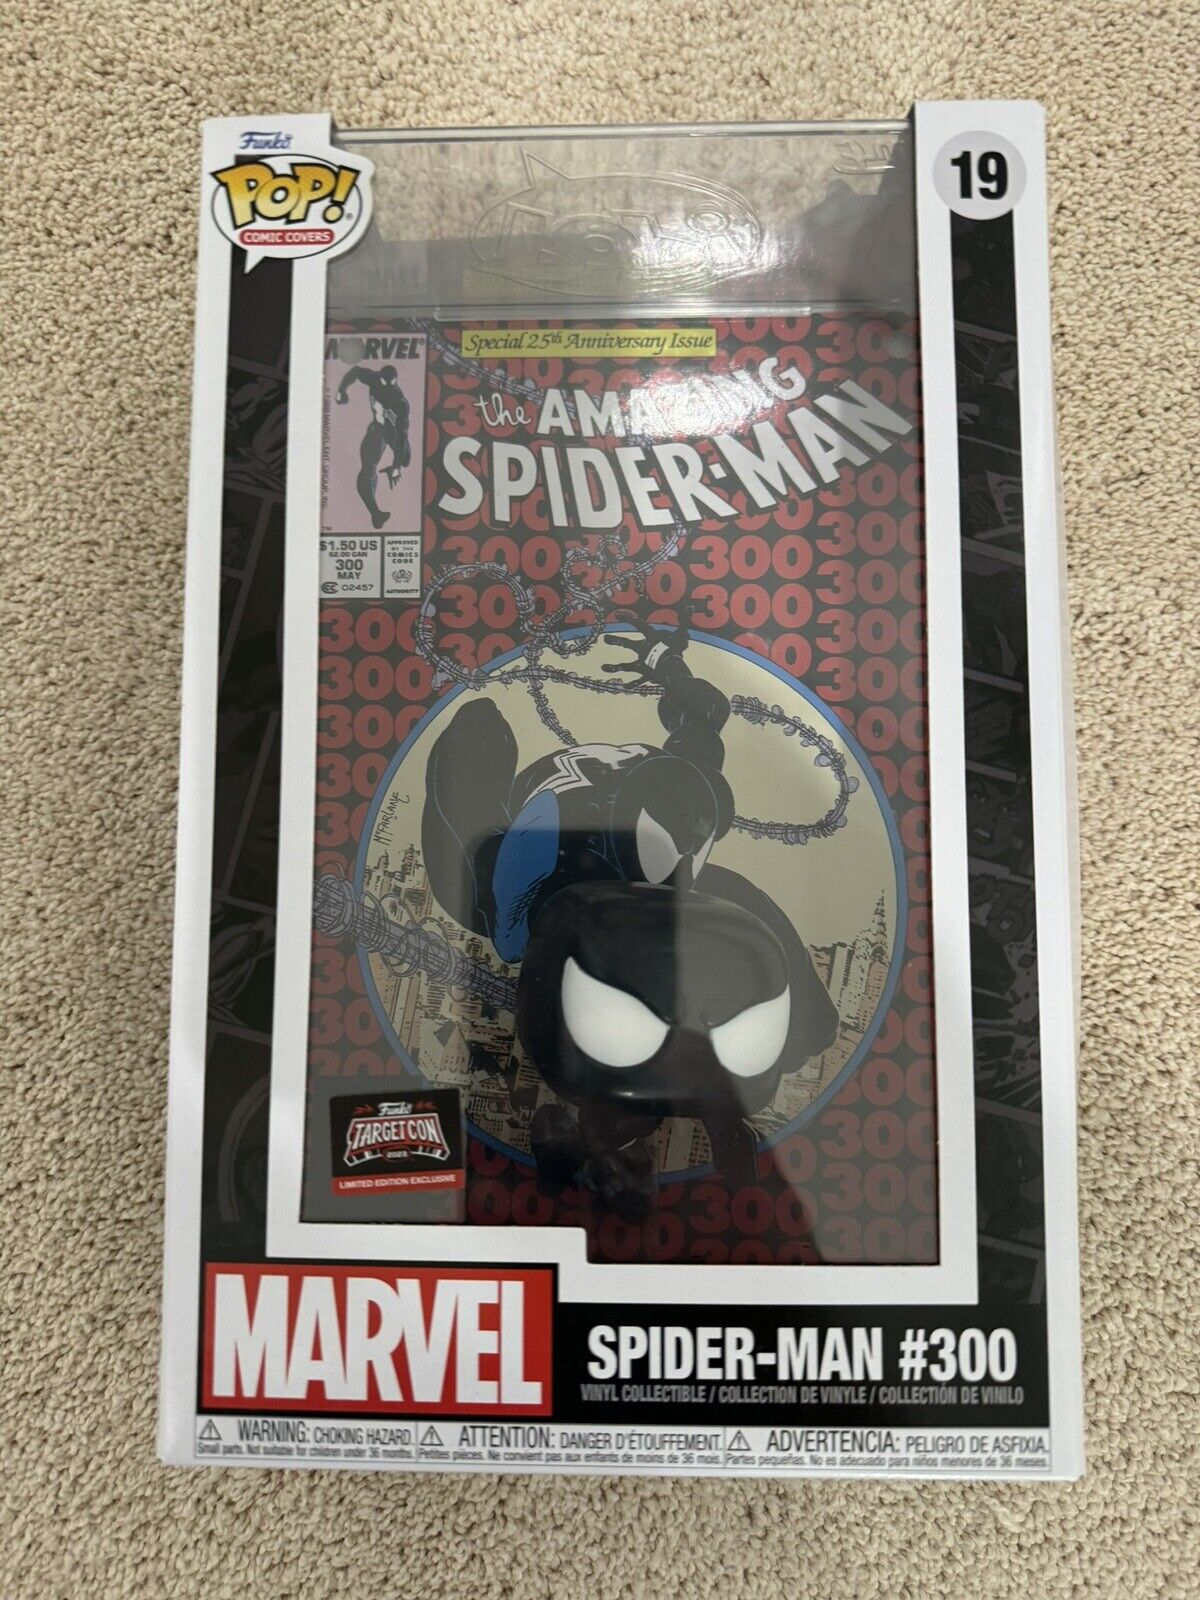 Funko Pop Comic Book Cover with case: Marvel - Spider-Man #300 - Target (T)...